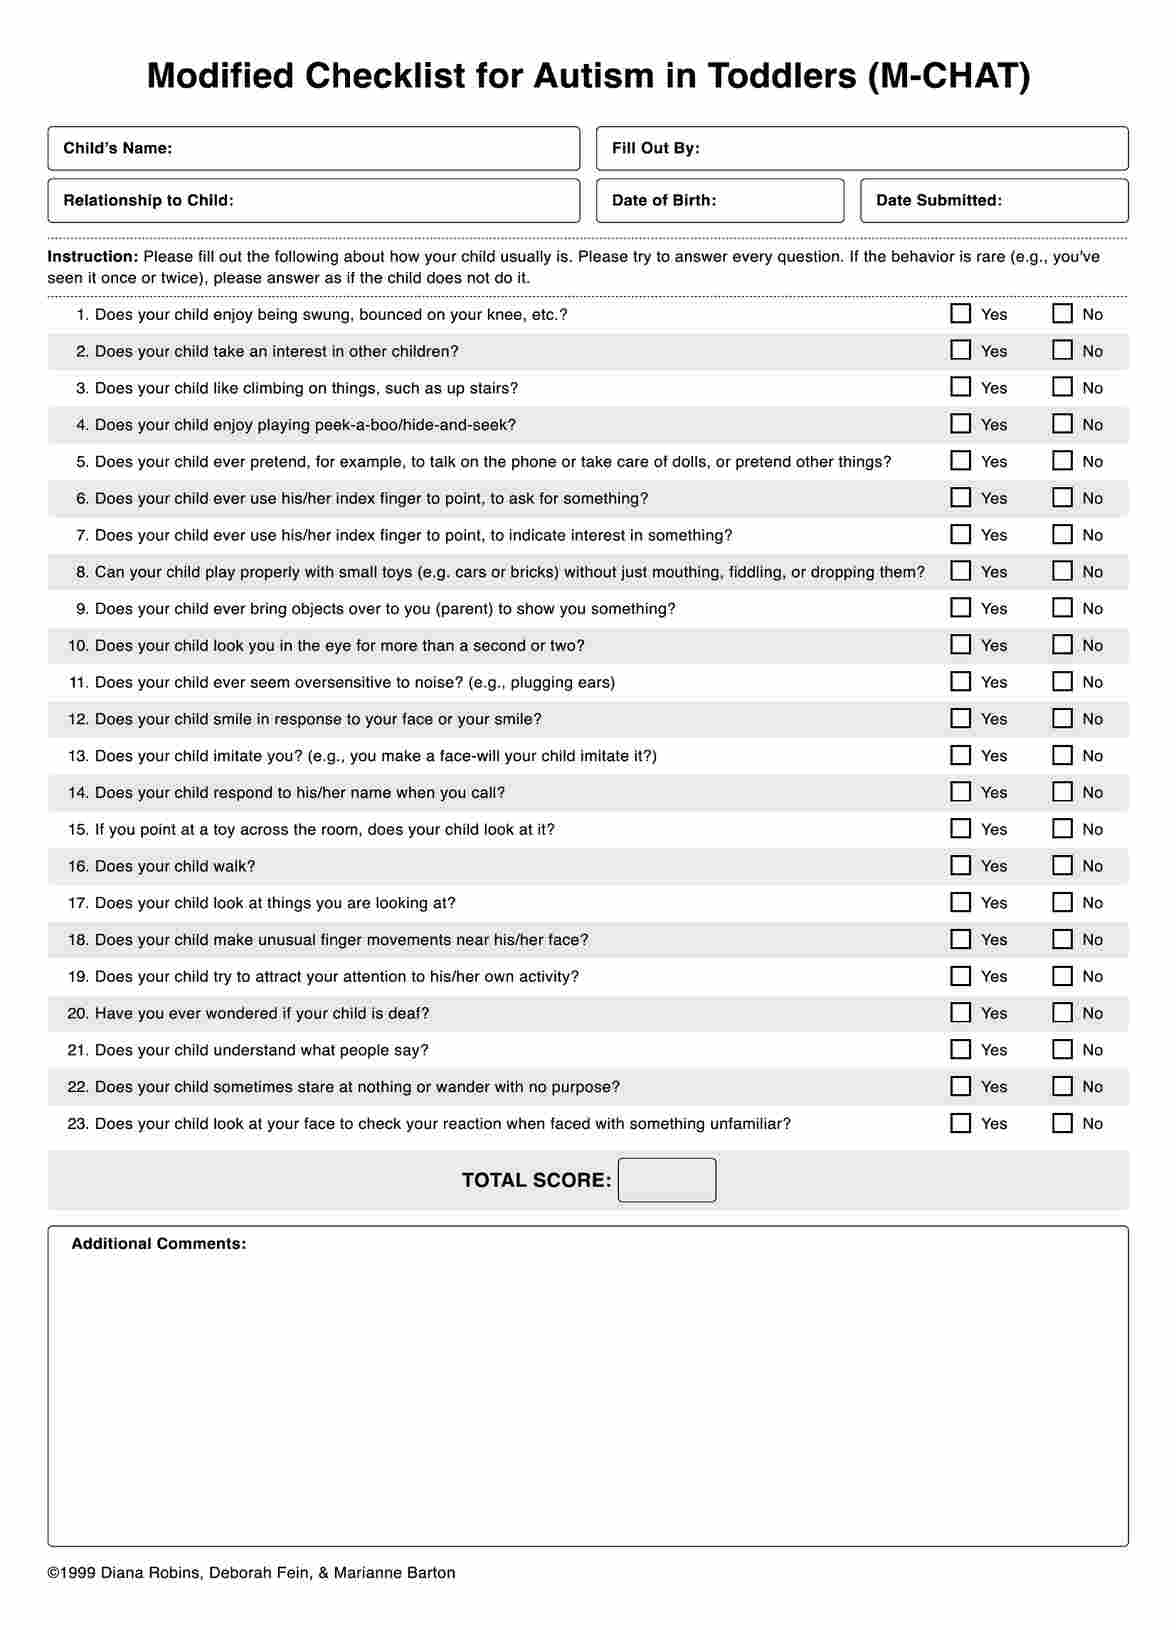 Modified Checklist for Autism in Toddlers (M-CHAT) PDF Example